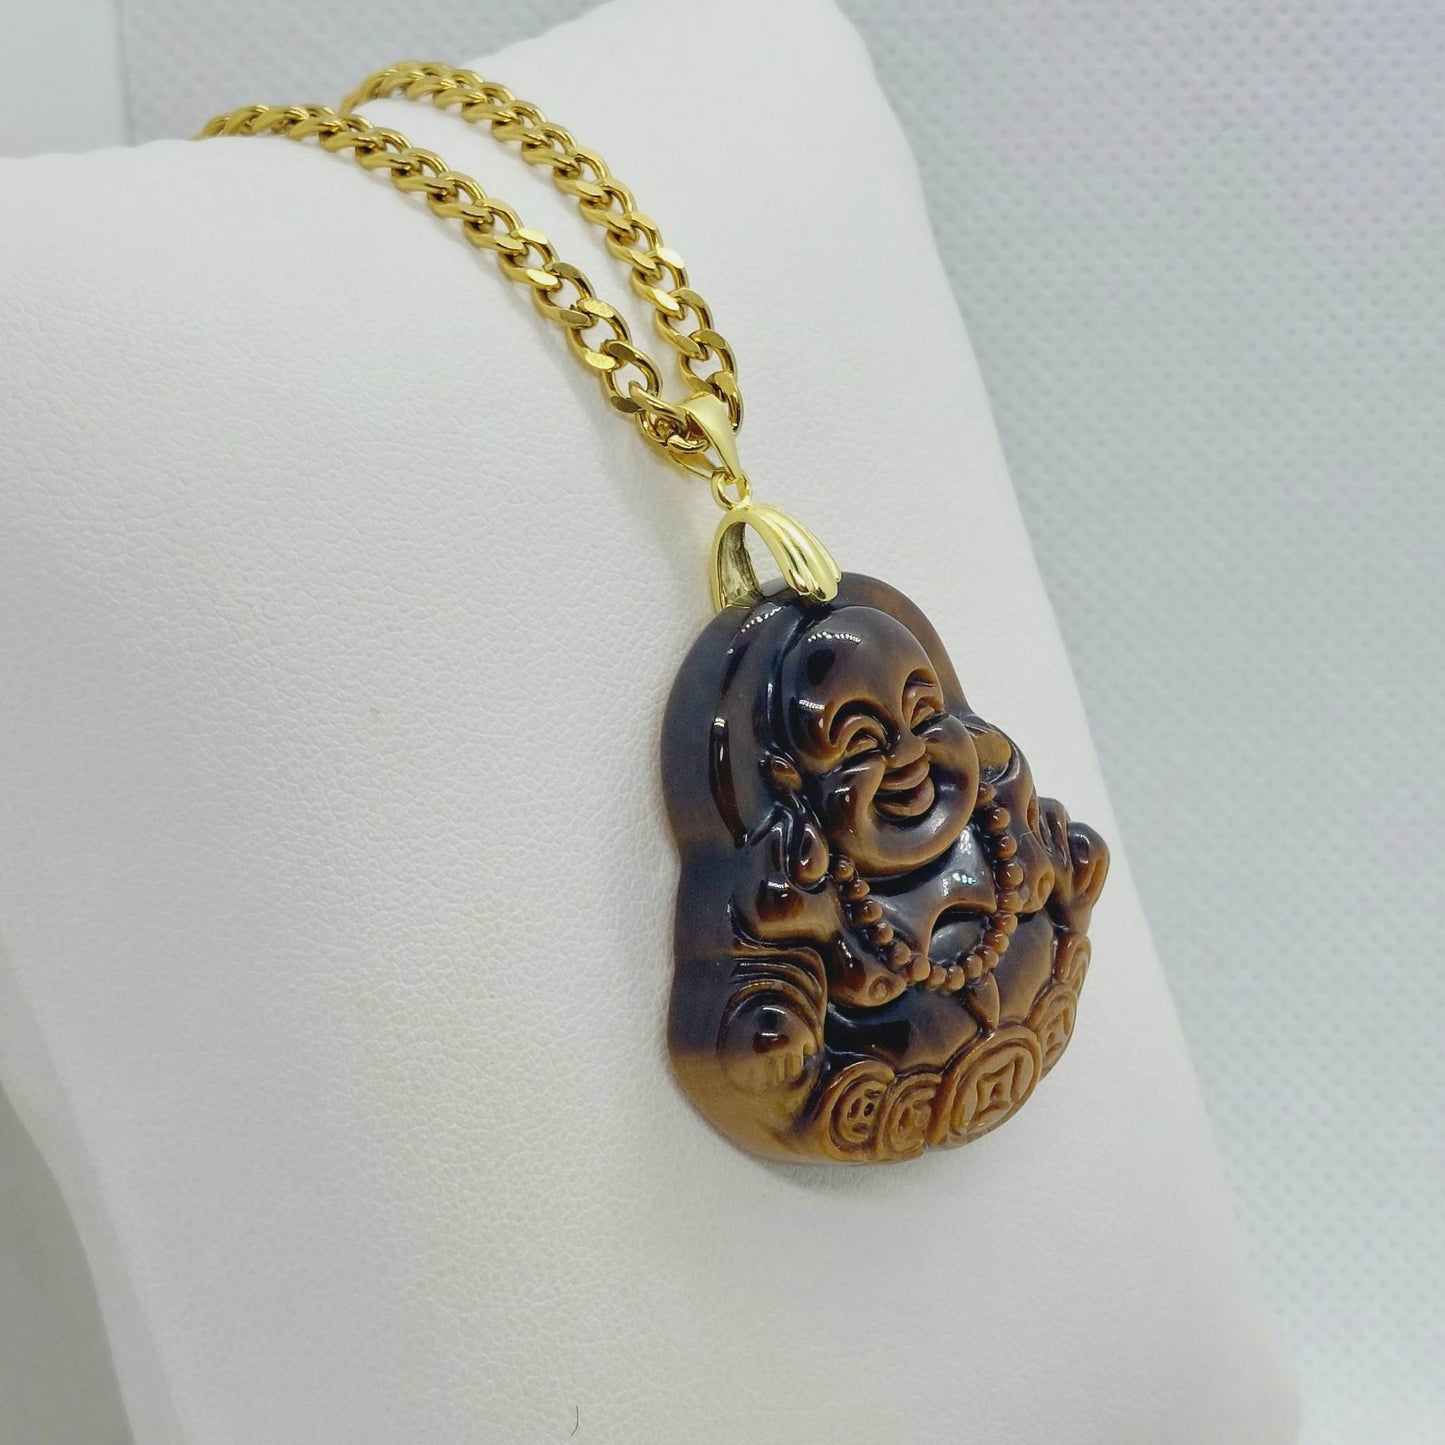 Natural Tiger Eye Laughing Buddha Pendant - Stainless Steel Gold Plated Chain Necklace